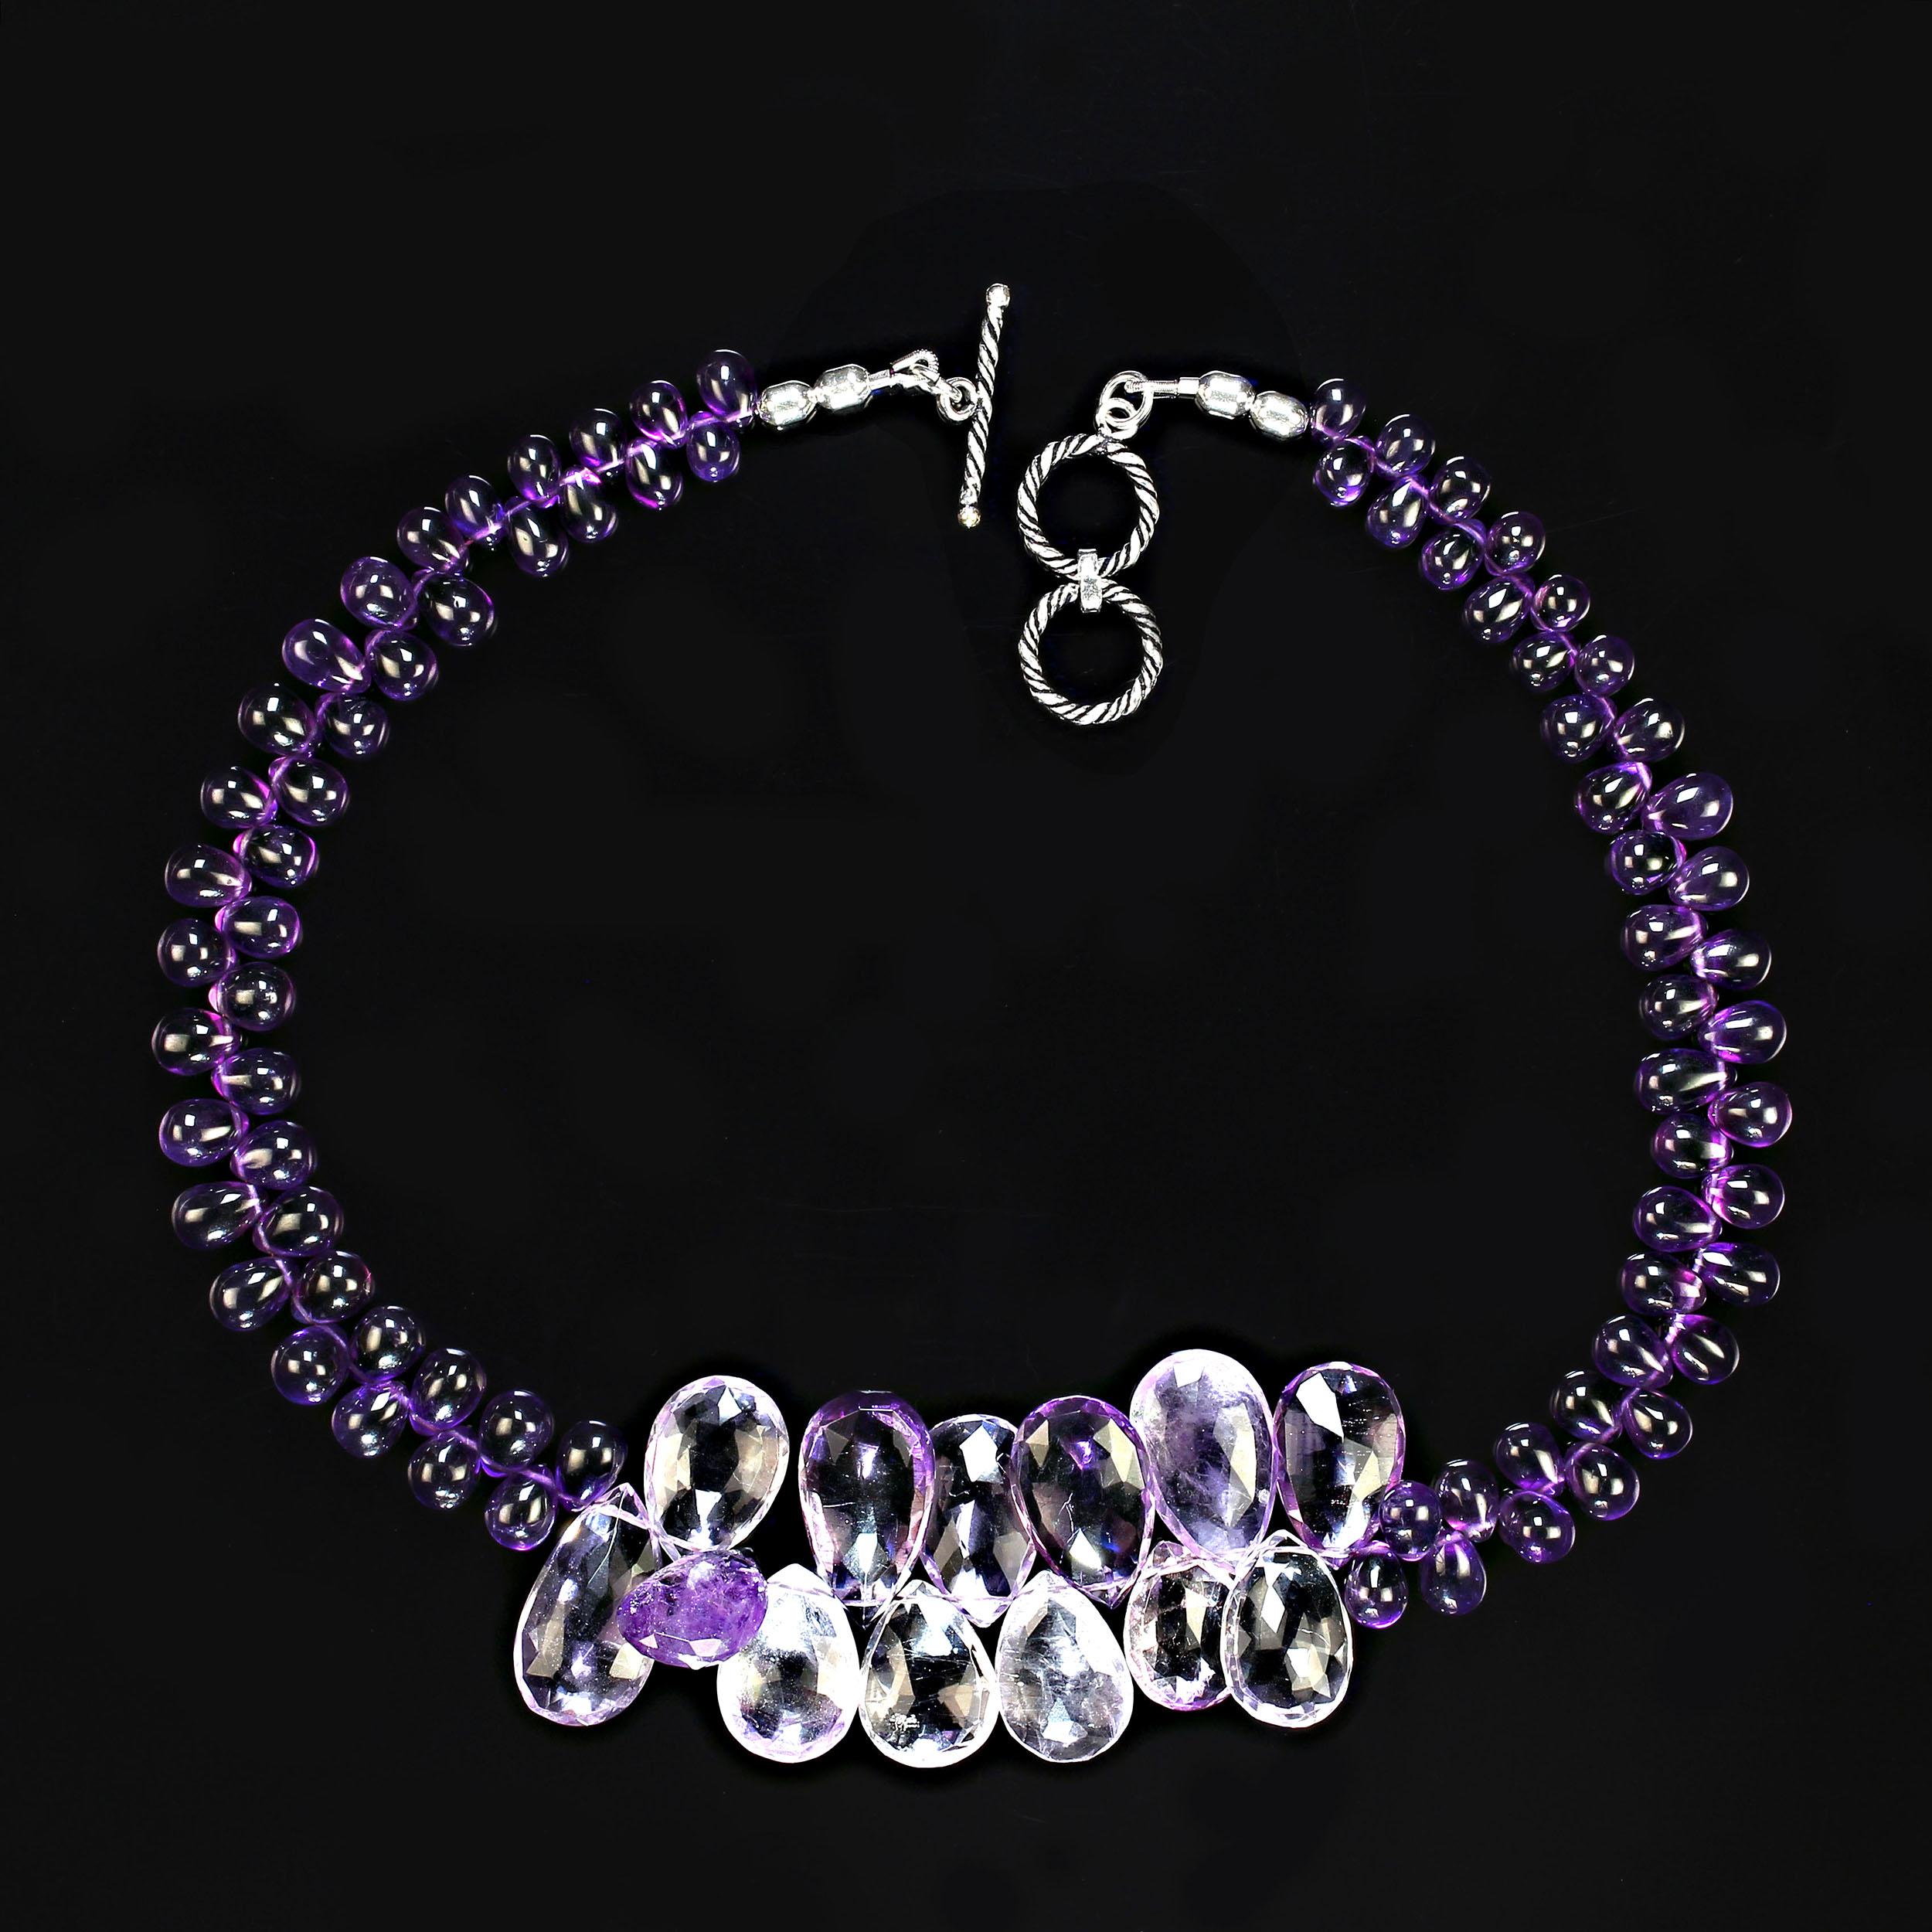 Bead AJD Unique and Exquisite Amethyst 17 Inch necklace  Great February Gift! For Sale